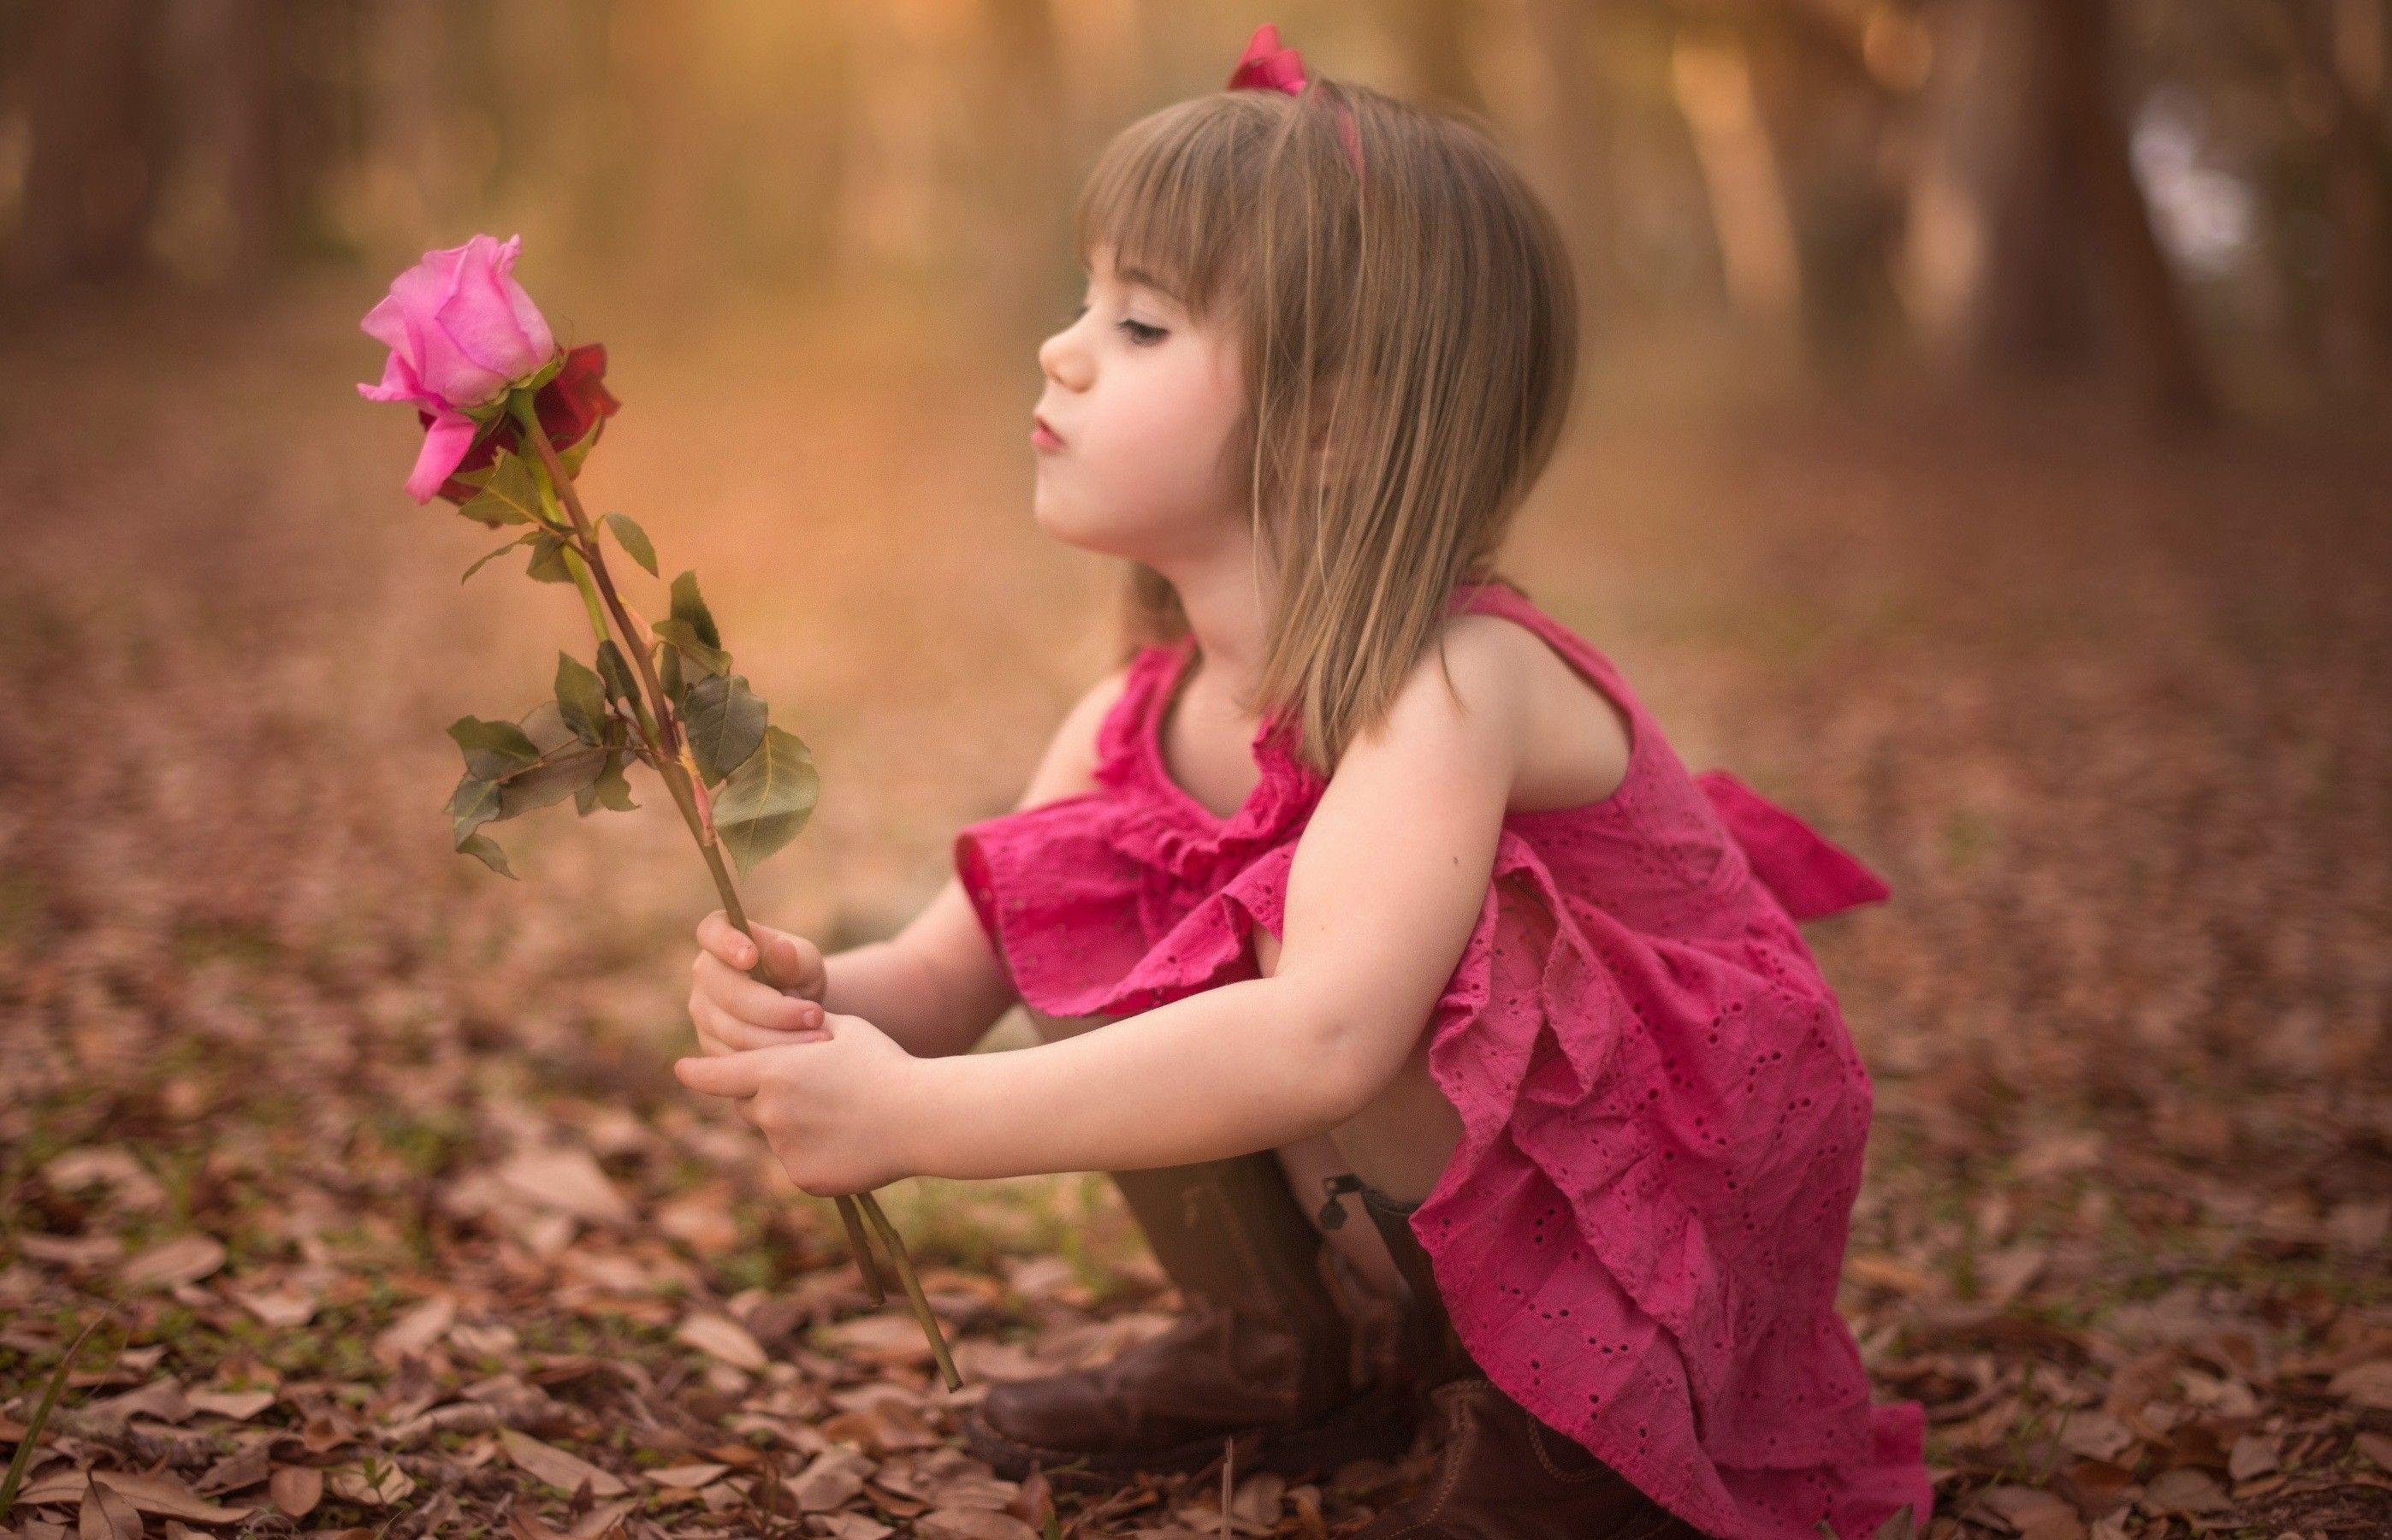 Wallpaper Beautiful Small Child Baby Wall With Lovely Picture Wallpaper Full HD Pics For Smartphon. Beautiful baby girl names, Baby girl names, Baby girl photo